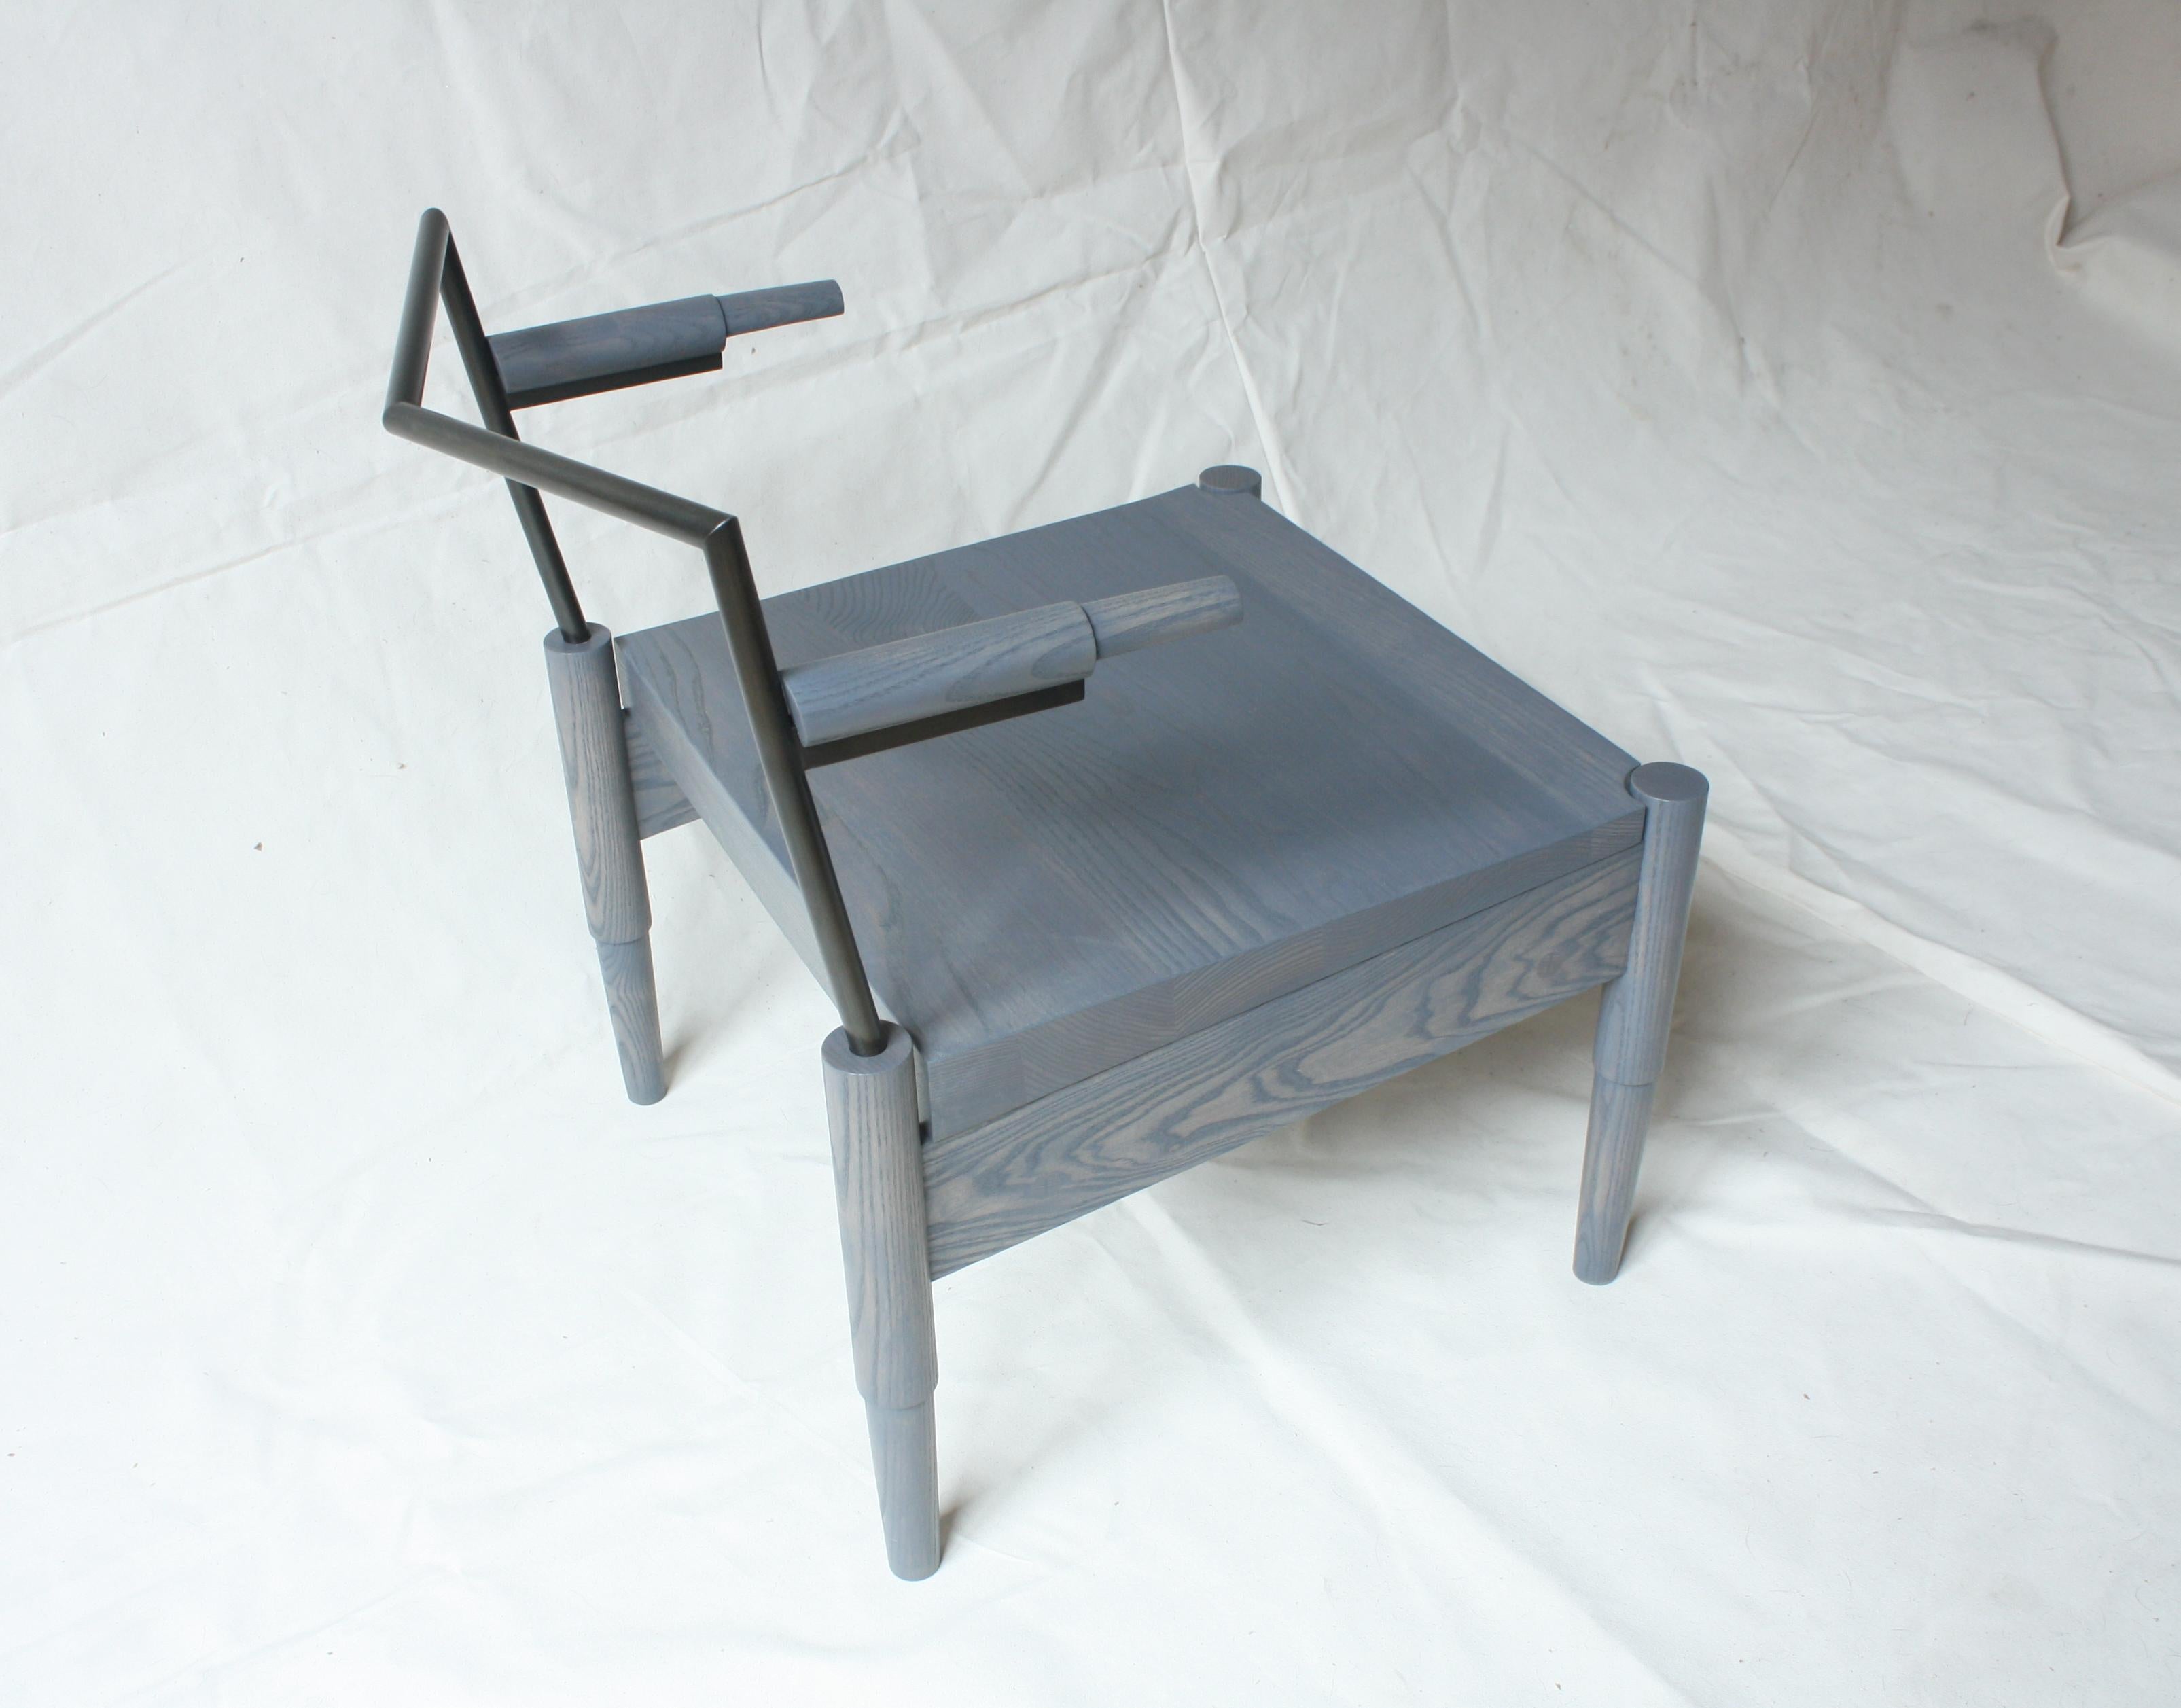 Shown in oil washed ash and blackened steel

Measures: 23